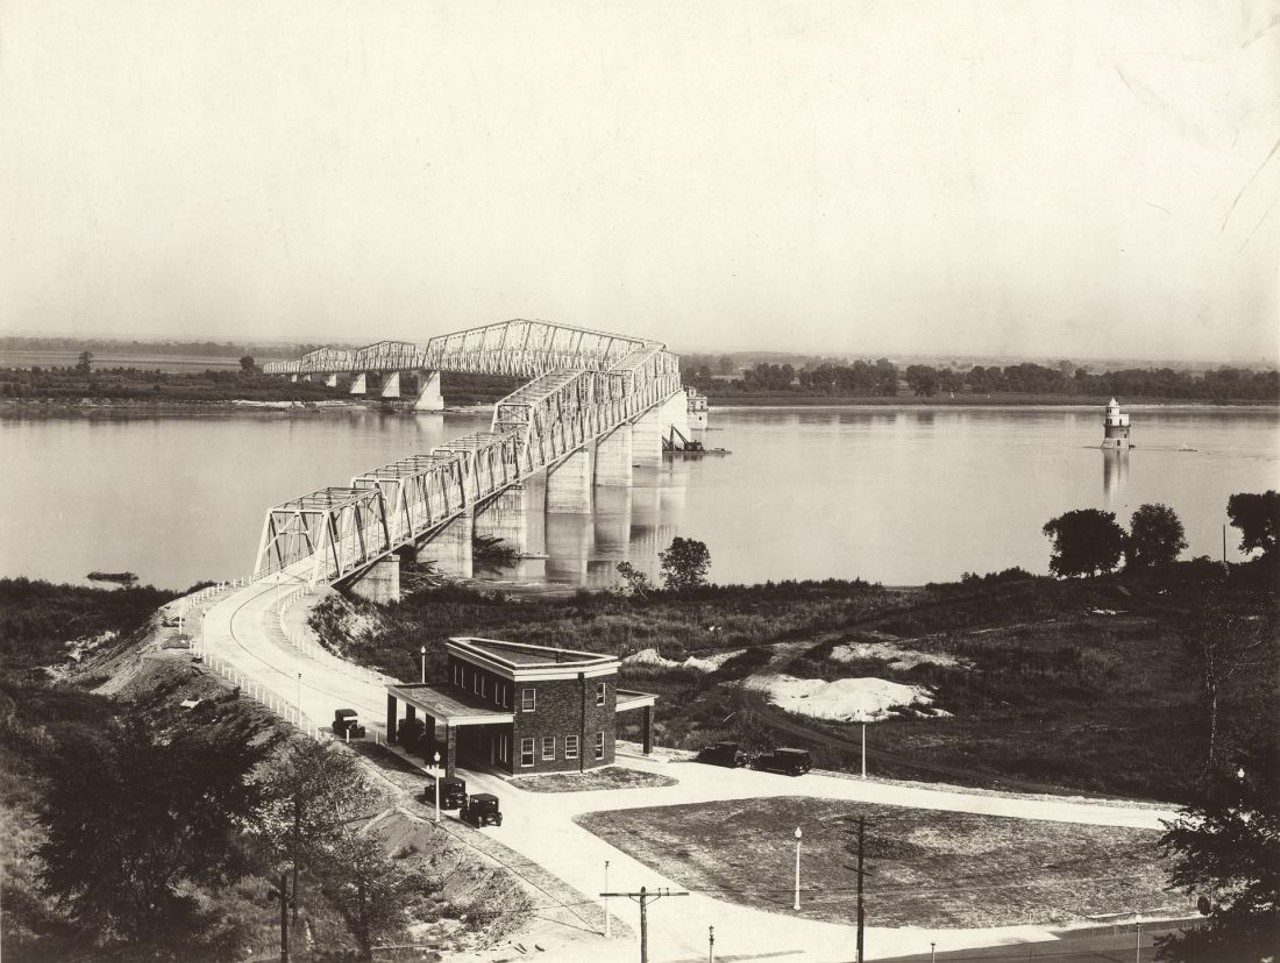 CHAIN OF ROCKS BRIDGE, 1929. ROUTE 66 (1936 - 1955), ROUTE 66 BYPASS (1956 - 1965)
"The bridge's famous 22-degree dogleg bend resulted from the Corps of Engineers' demands that the bridge face riverboat traffic head on. The Chain of Rocks Bridge closed in 1970, just after the toll-free Interstate 270 bridge opened up stream. In 1981 it served as a backdrop in the dystopian sci-fi film 'Escape from New York.' Finally in 1999, Trailnet reopened the bridge as a bicycle and pedestrian crossing." &#151; Andrew Wanko, 'Great River City' 
Photograph by W.C. Persons, 1929. Missouri Historical Society Collections.